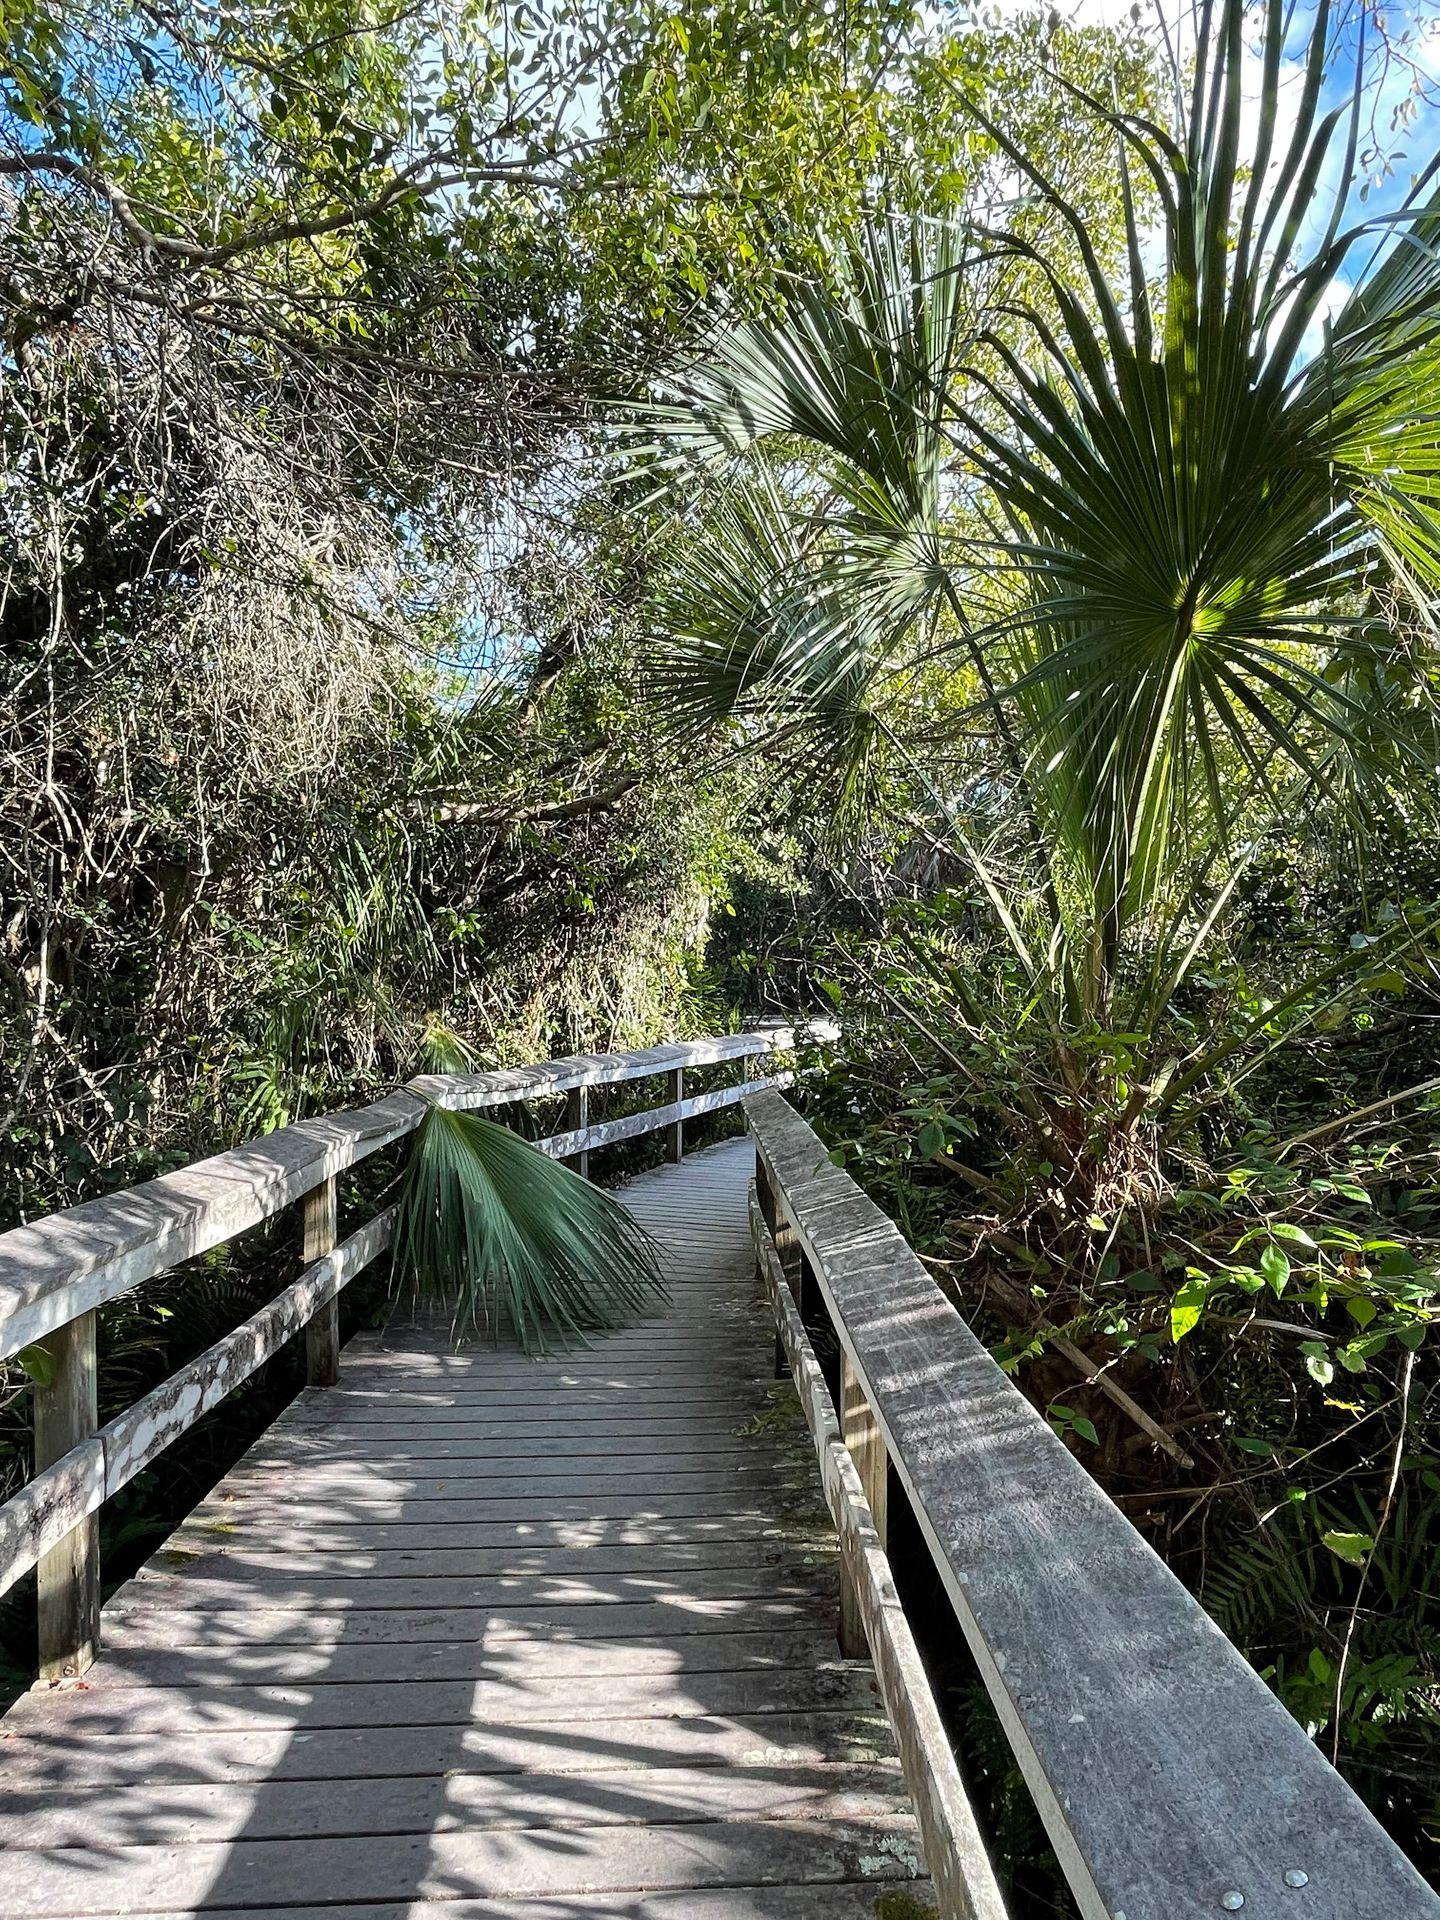 A wooden boardwalk trail through a dense forest of palms. One palm hangs over the railing and onto the trail.